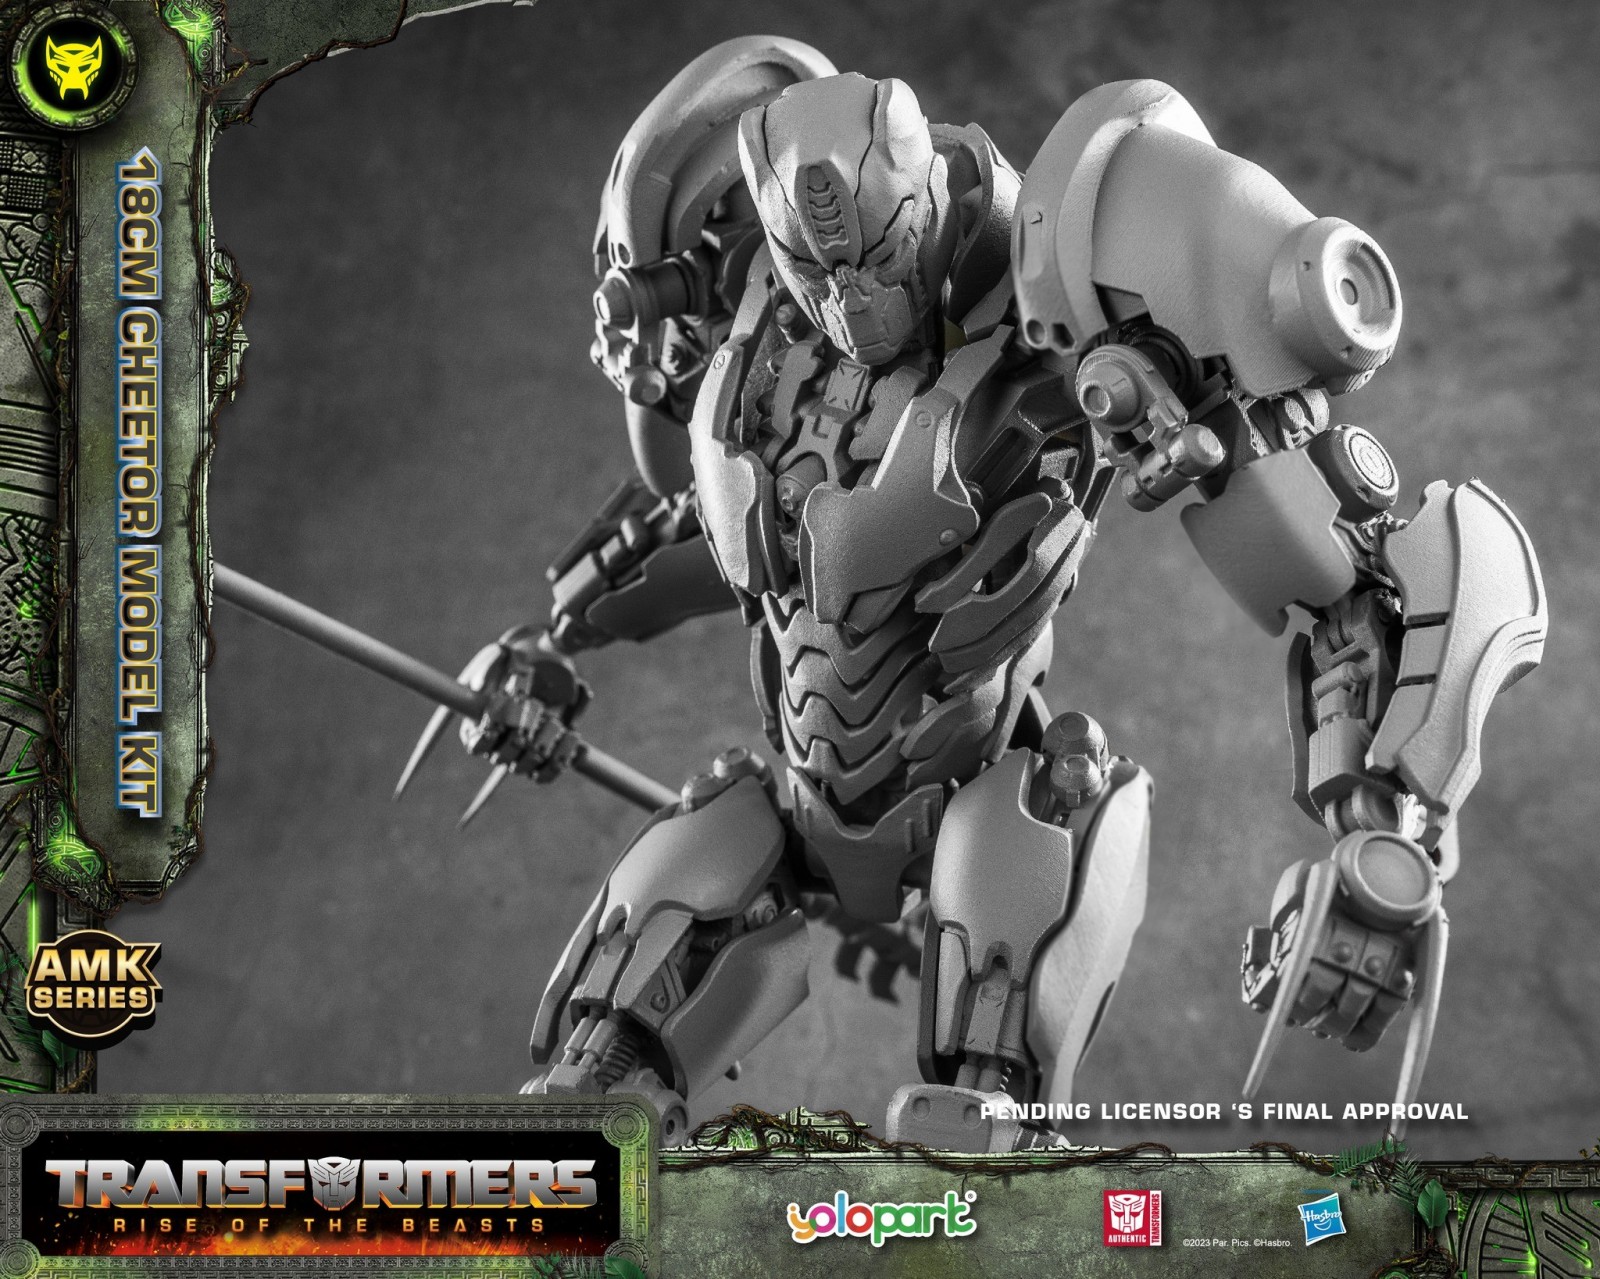 Transformers News: Yolopart Kits Rise of the Beasts Wave 2 - Scourge, Cheetor, and Rhinox